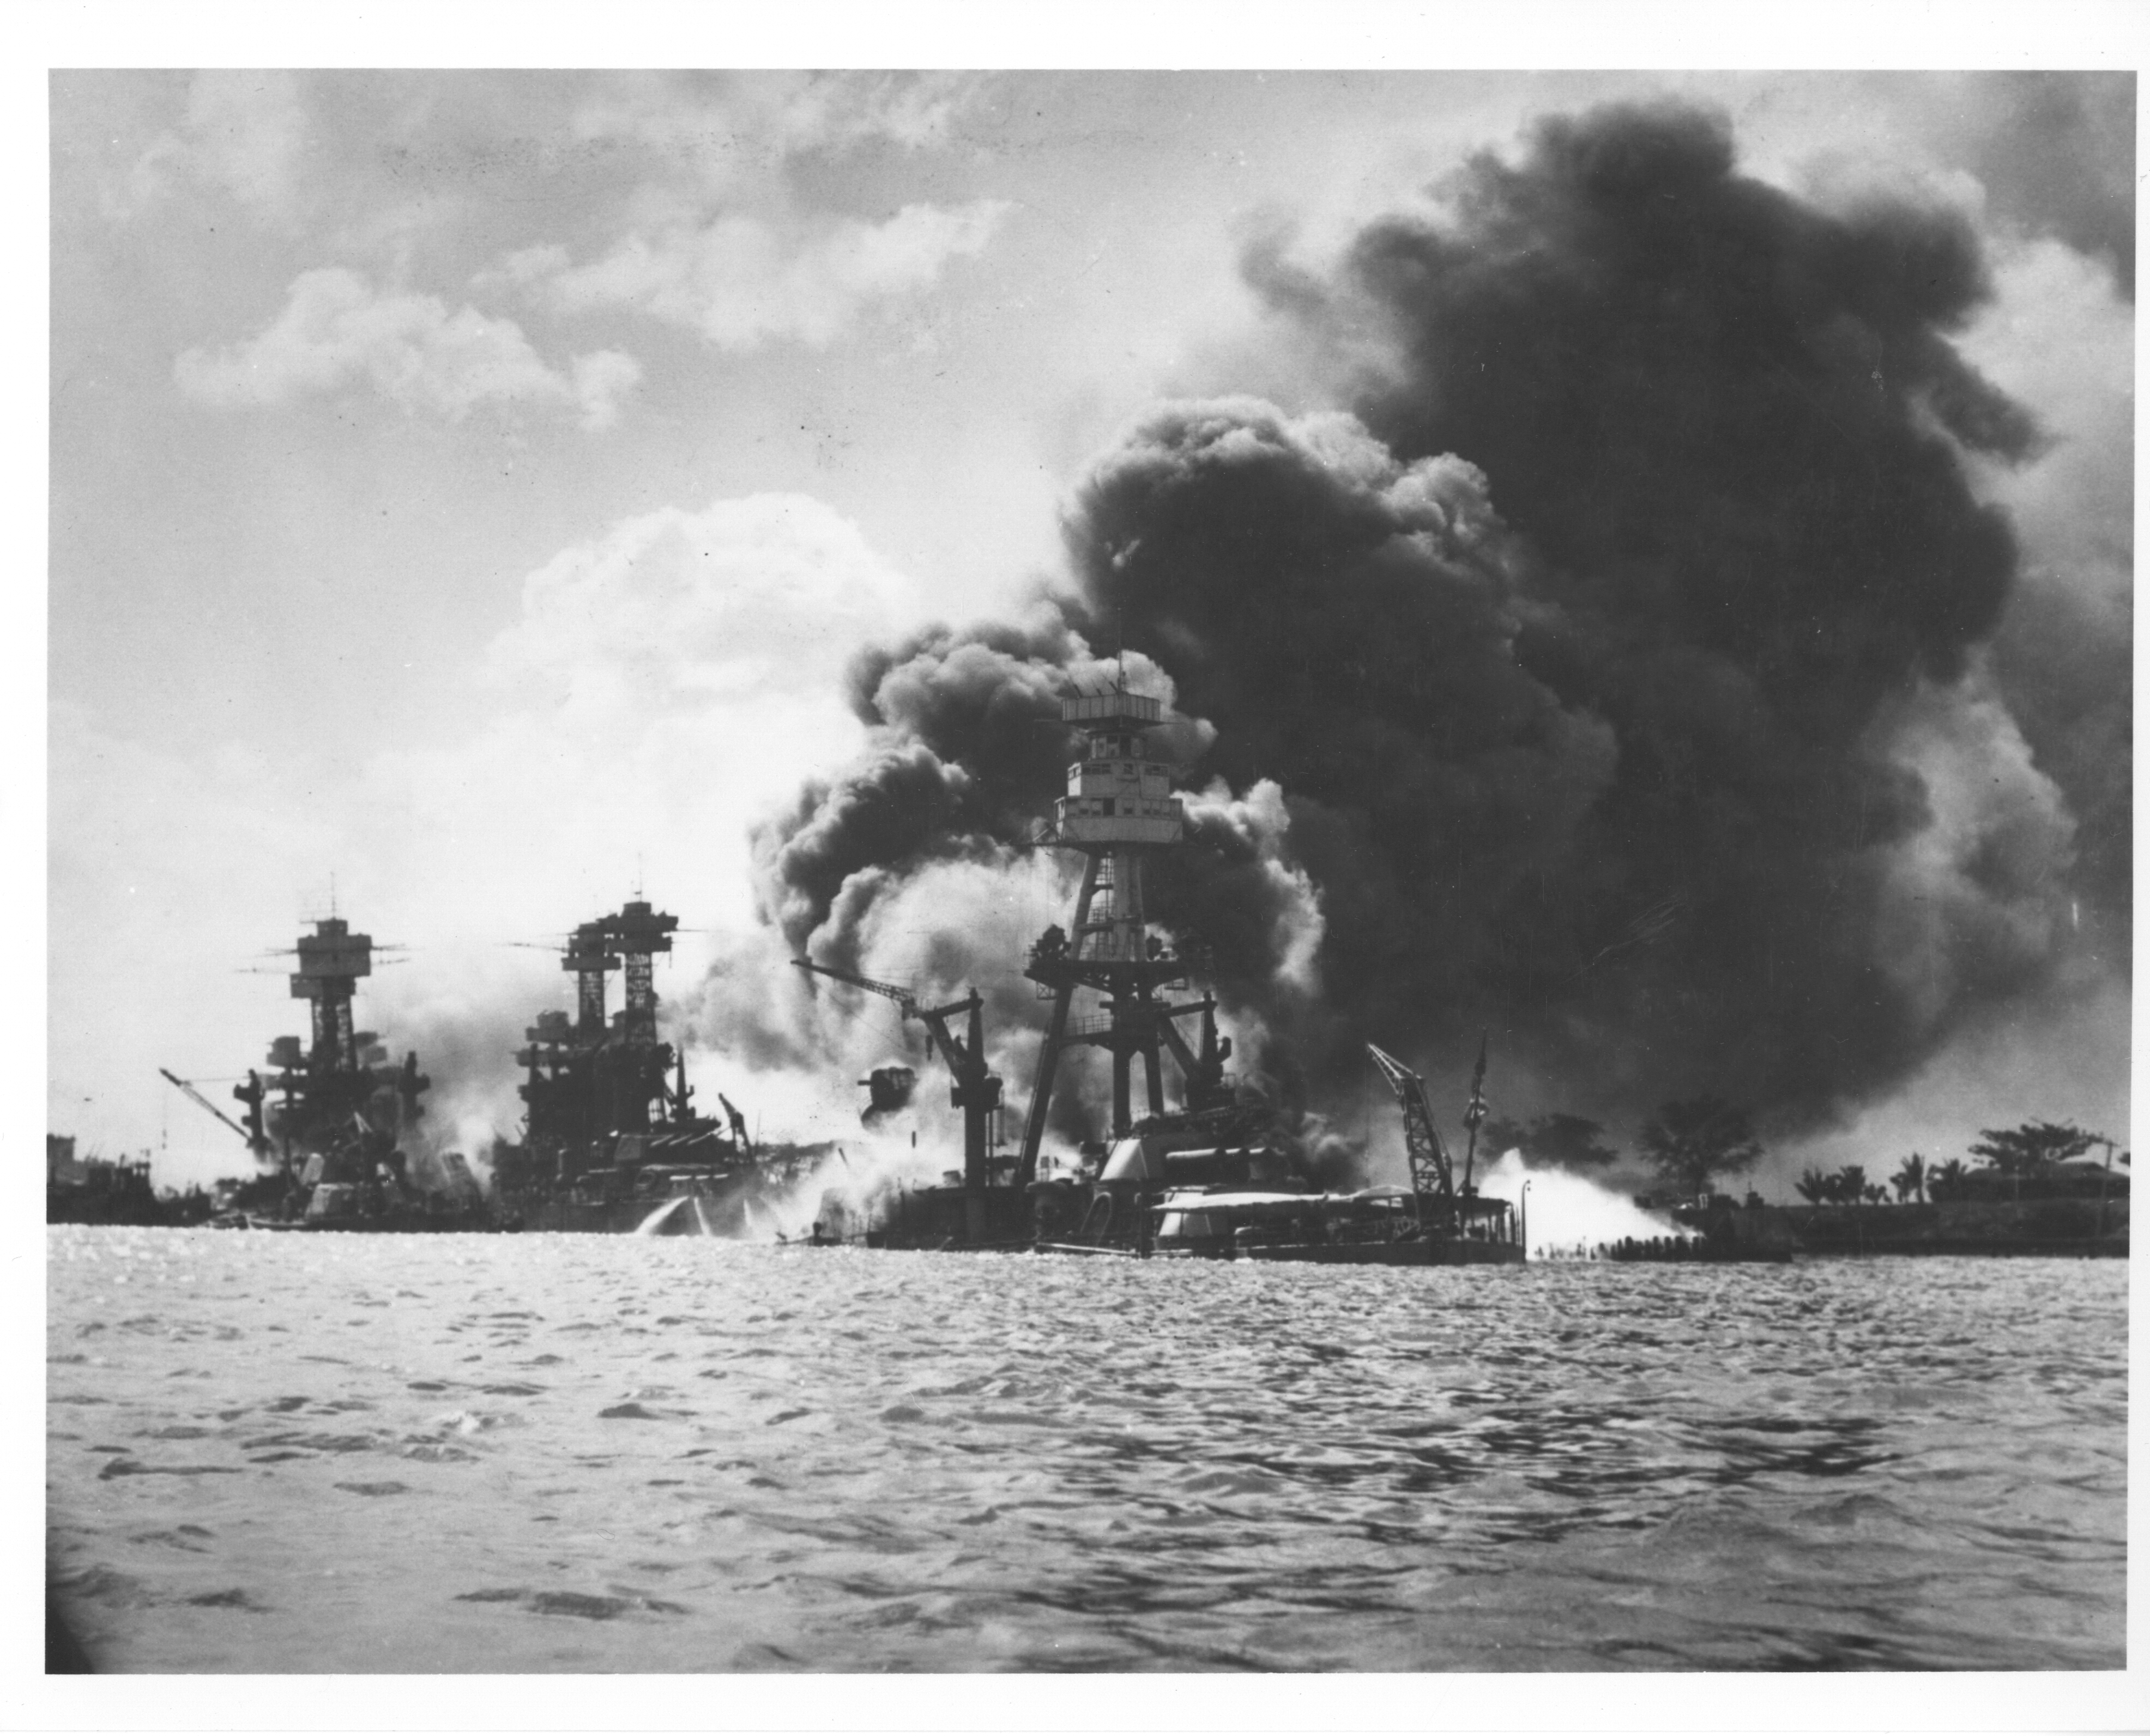 3 US naval ships engulfed in fires and thick dark smoke clouds in Pearl Harbor. Details in text.